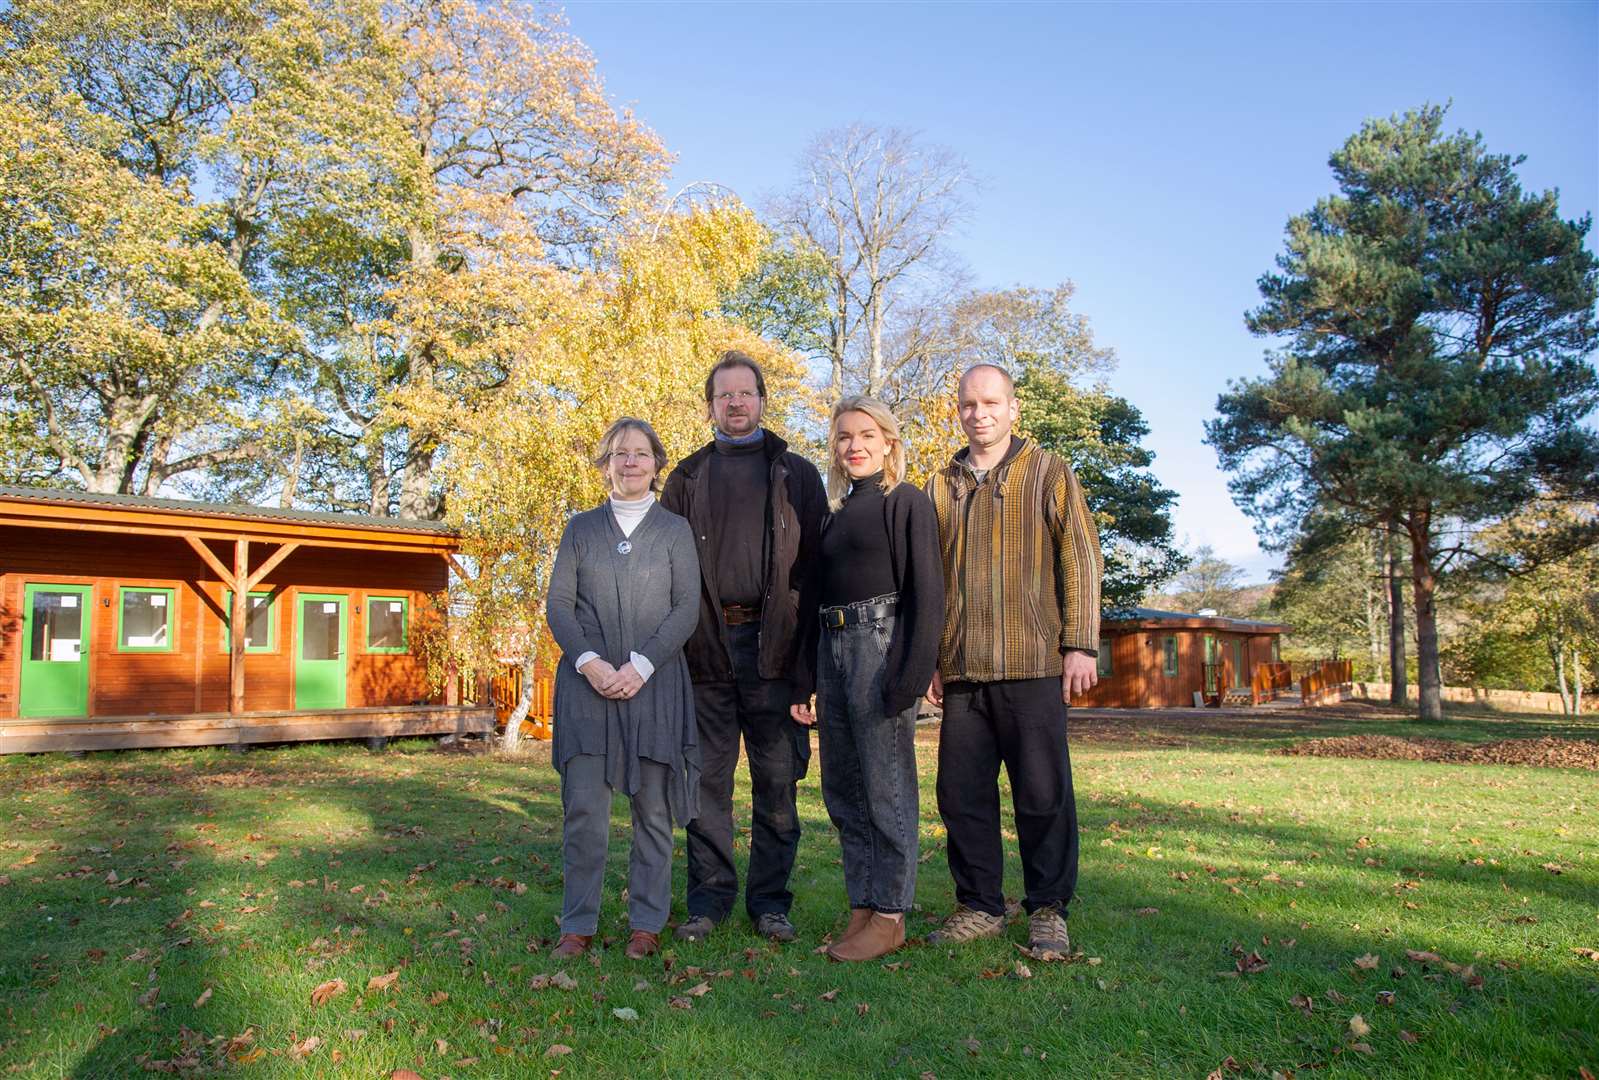 Betsy van der Lee, Sven, Kris and Gulli Skatun are welcoming visitors to the Marcassie Farm Lodges.